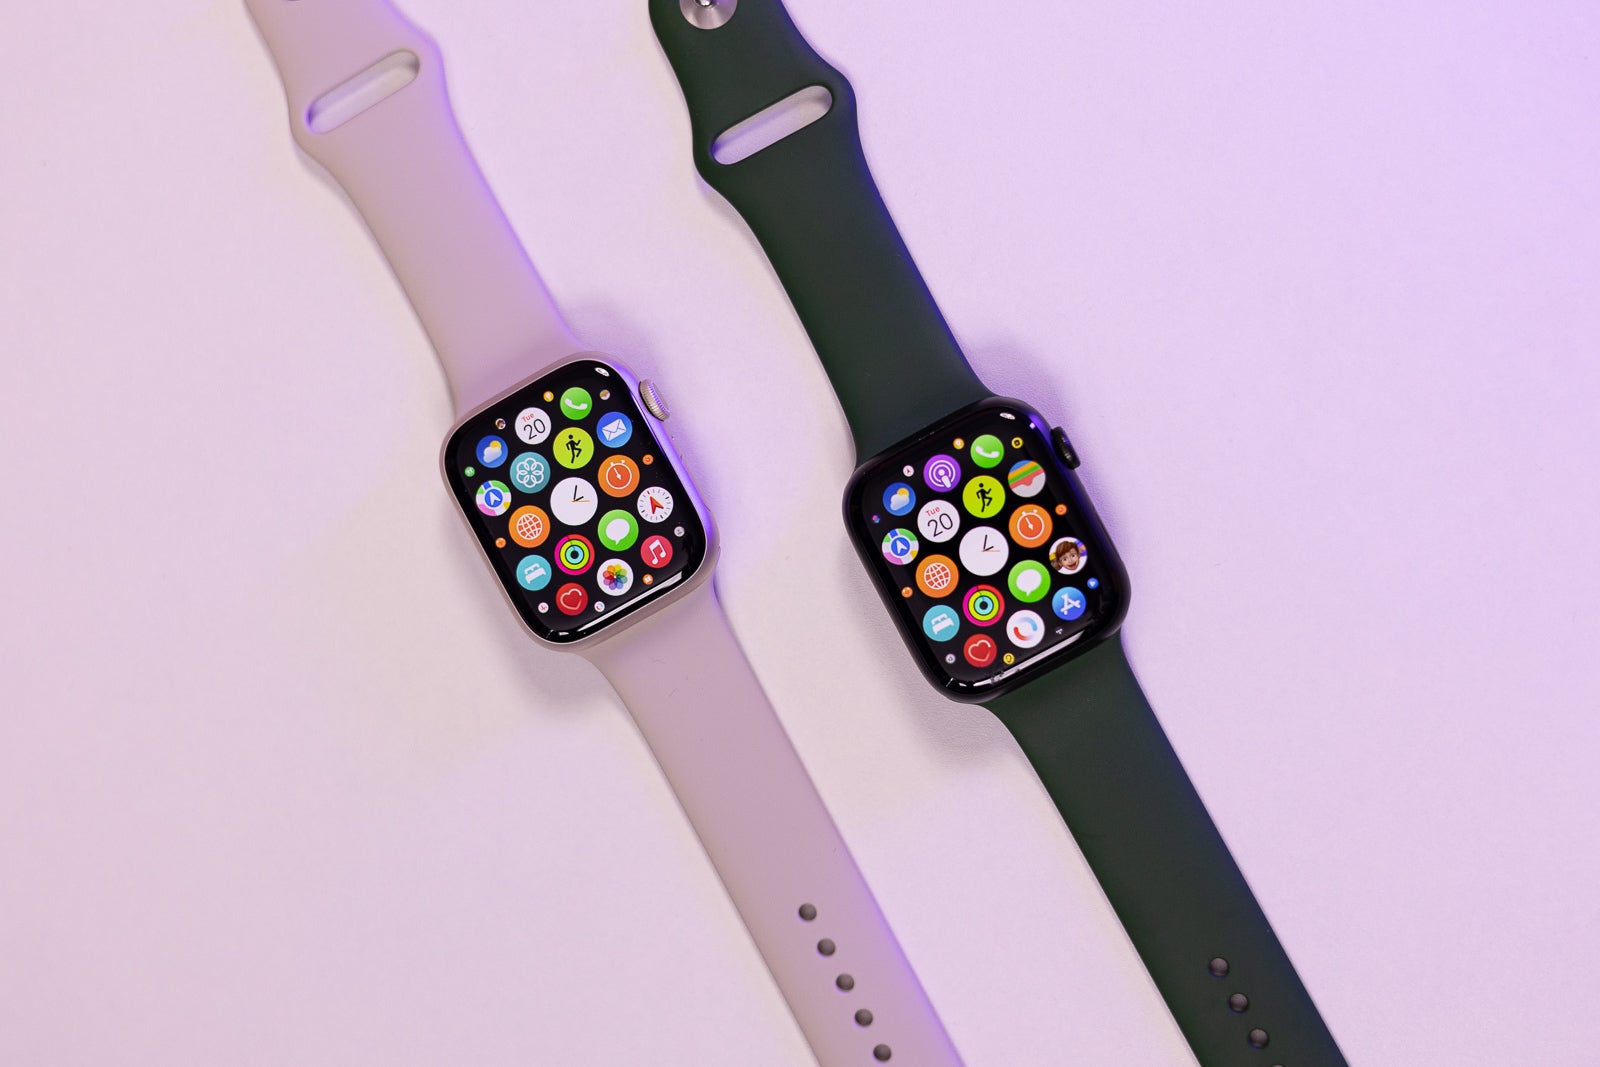 Apple highlights how the Apple Watch will help with long-term medical research around the world